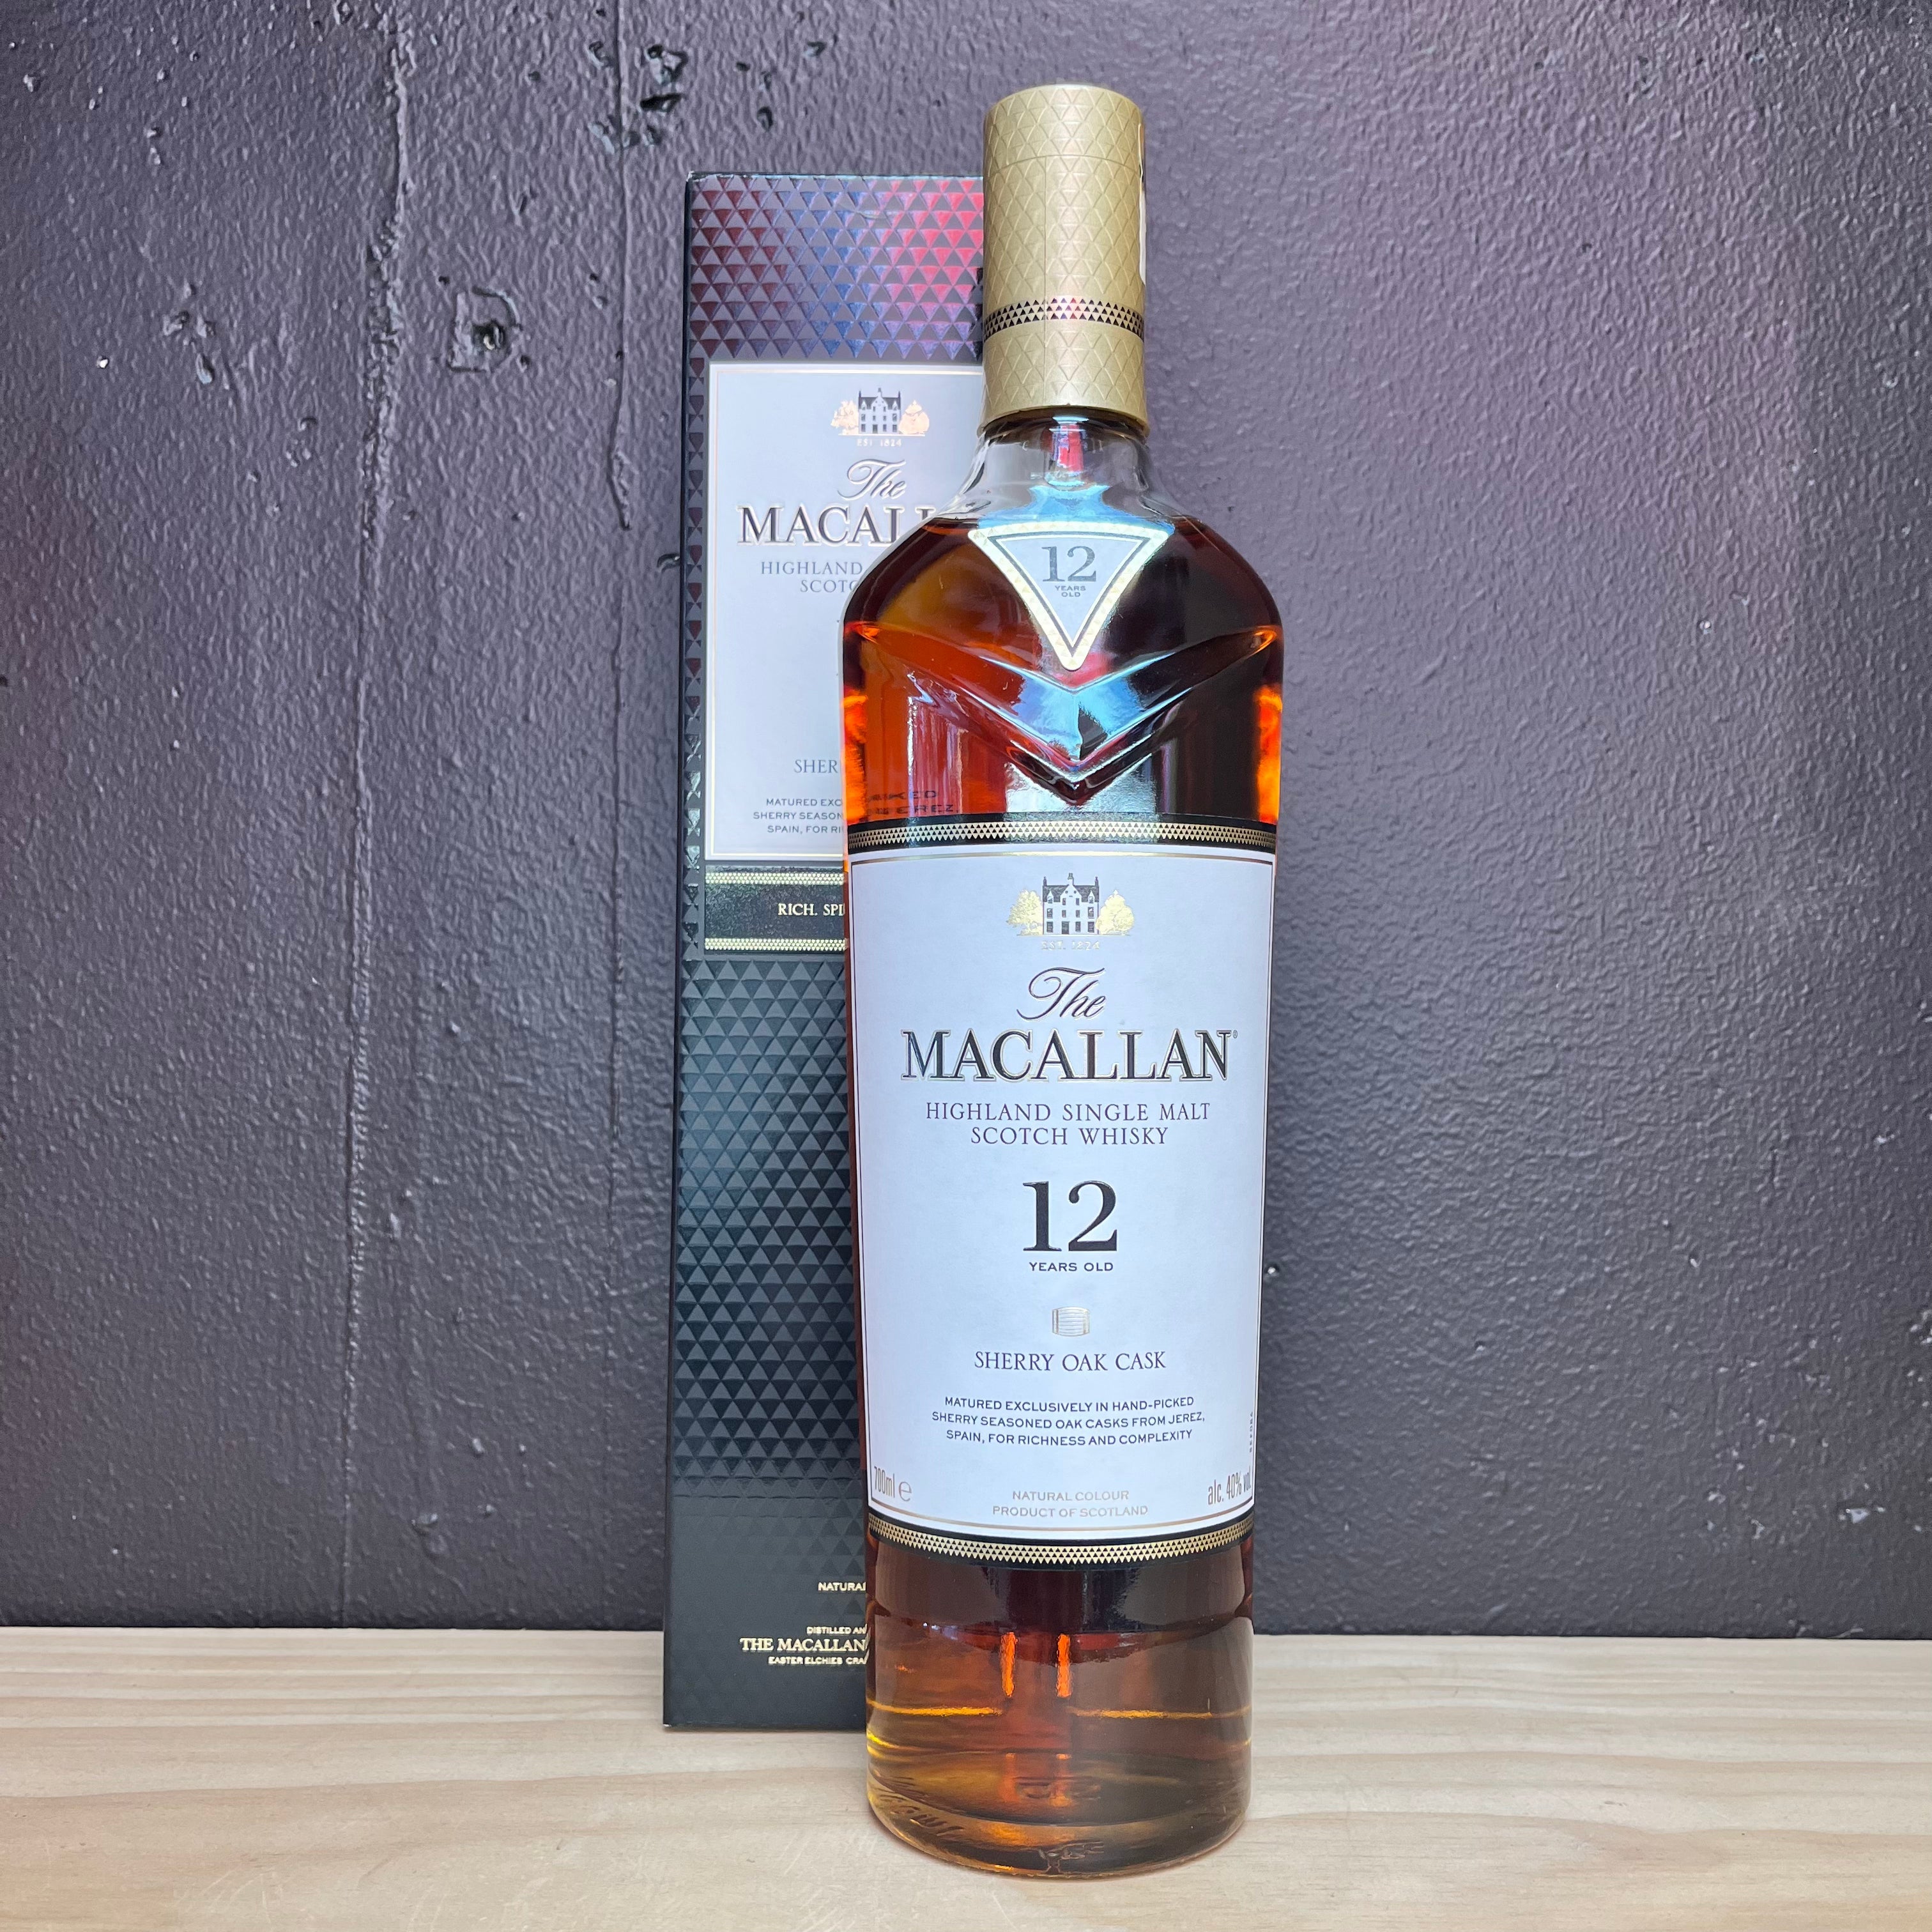 The Macallan 12 Year Old Sherry Cask